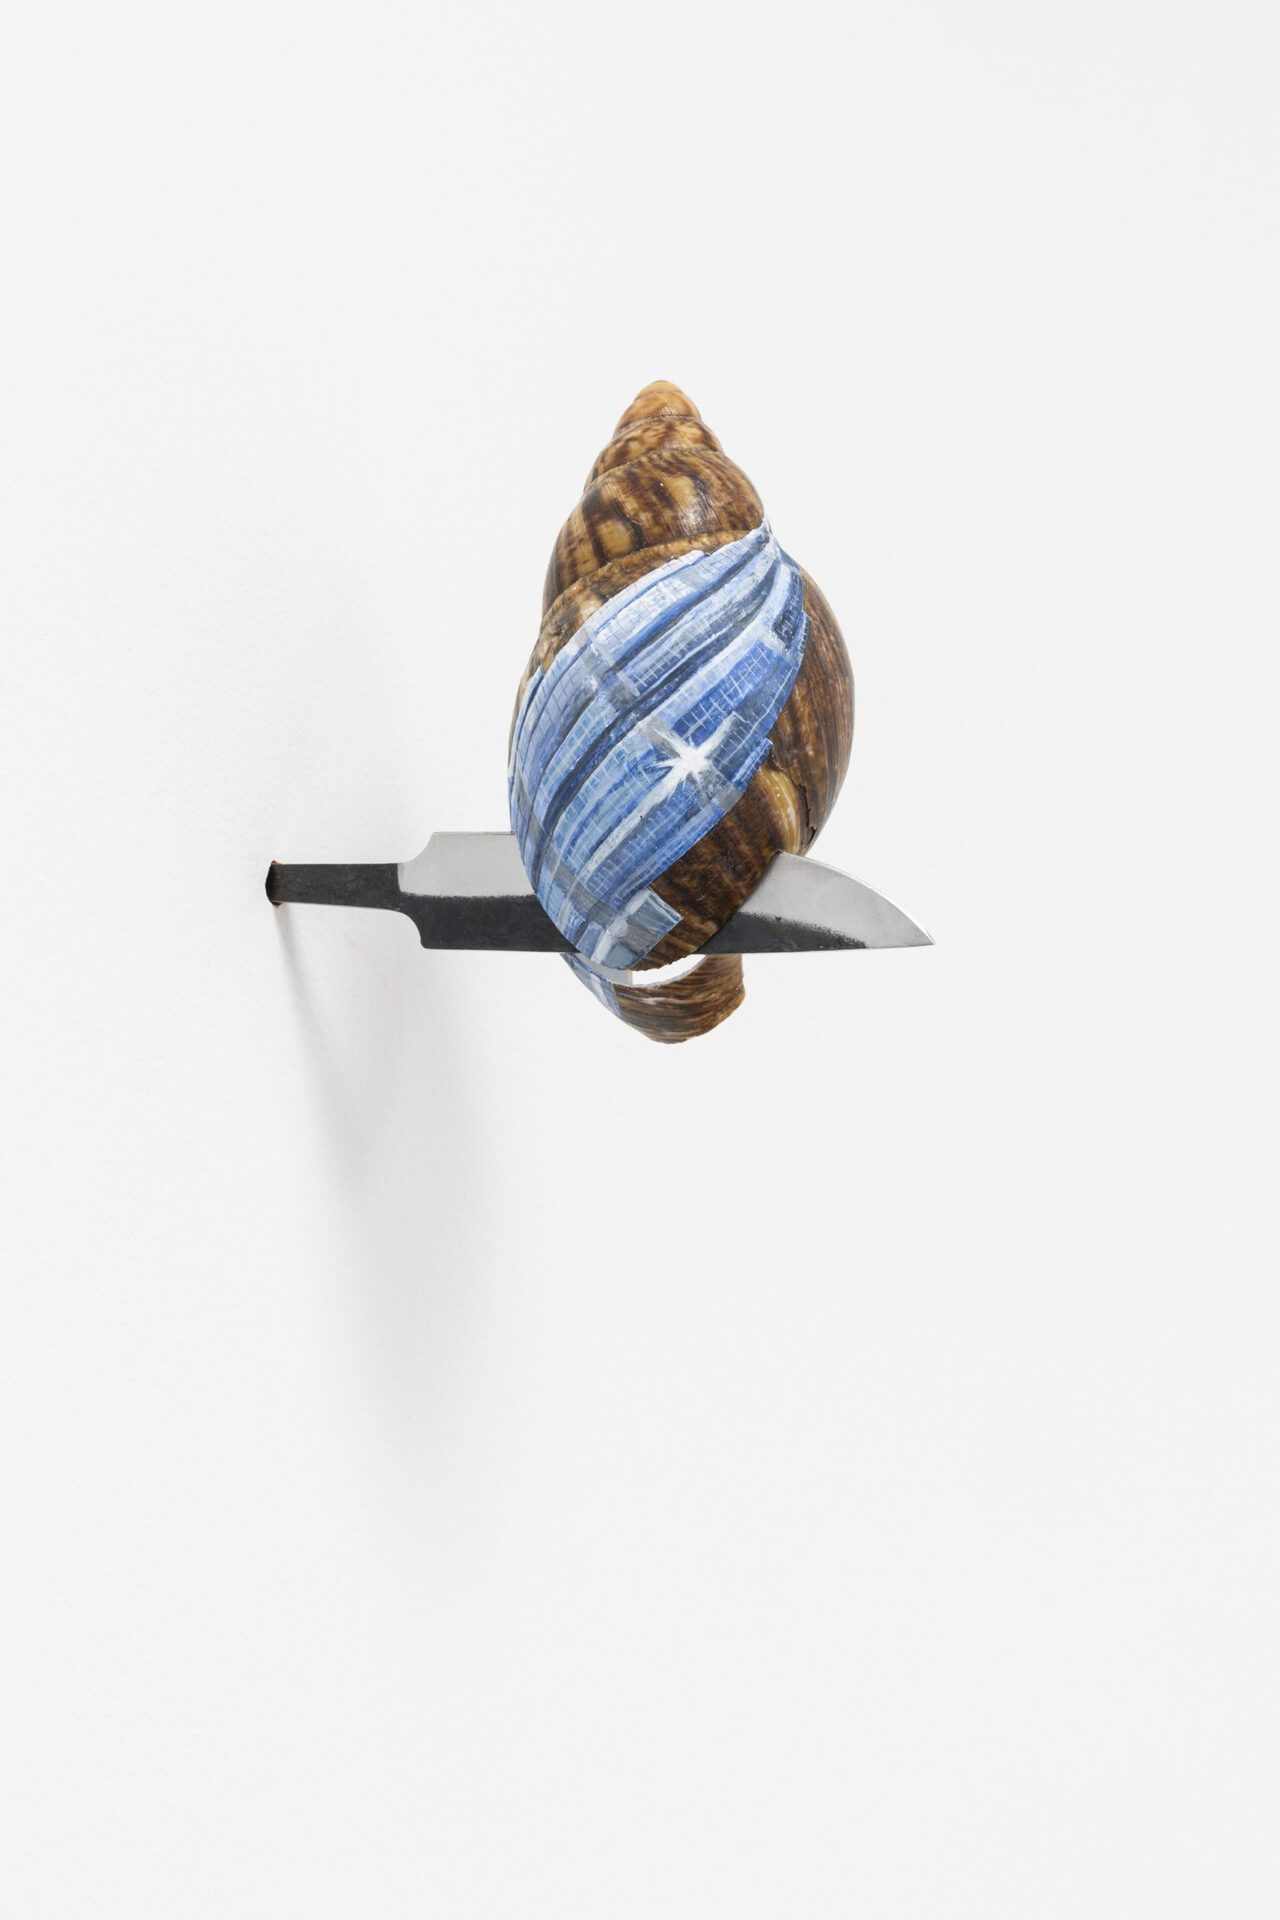 Bradley Davies & Jasmin Werner, "untitled", african snail shell on forged knife (metal), paint, varnish, ganache, dimensions variable, 2020